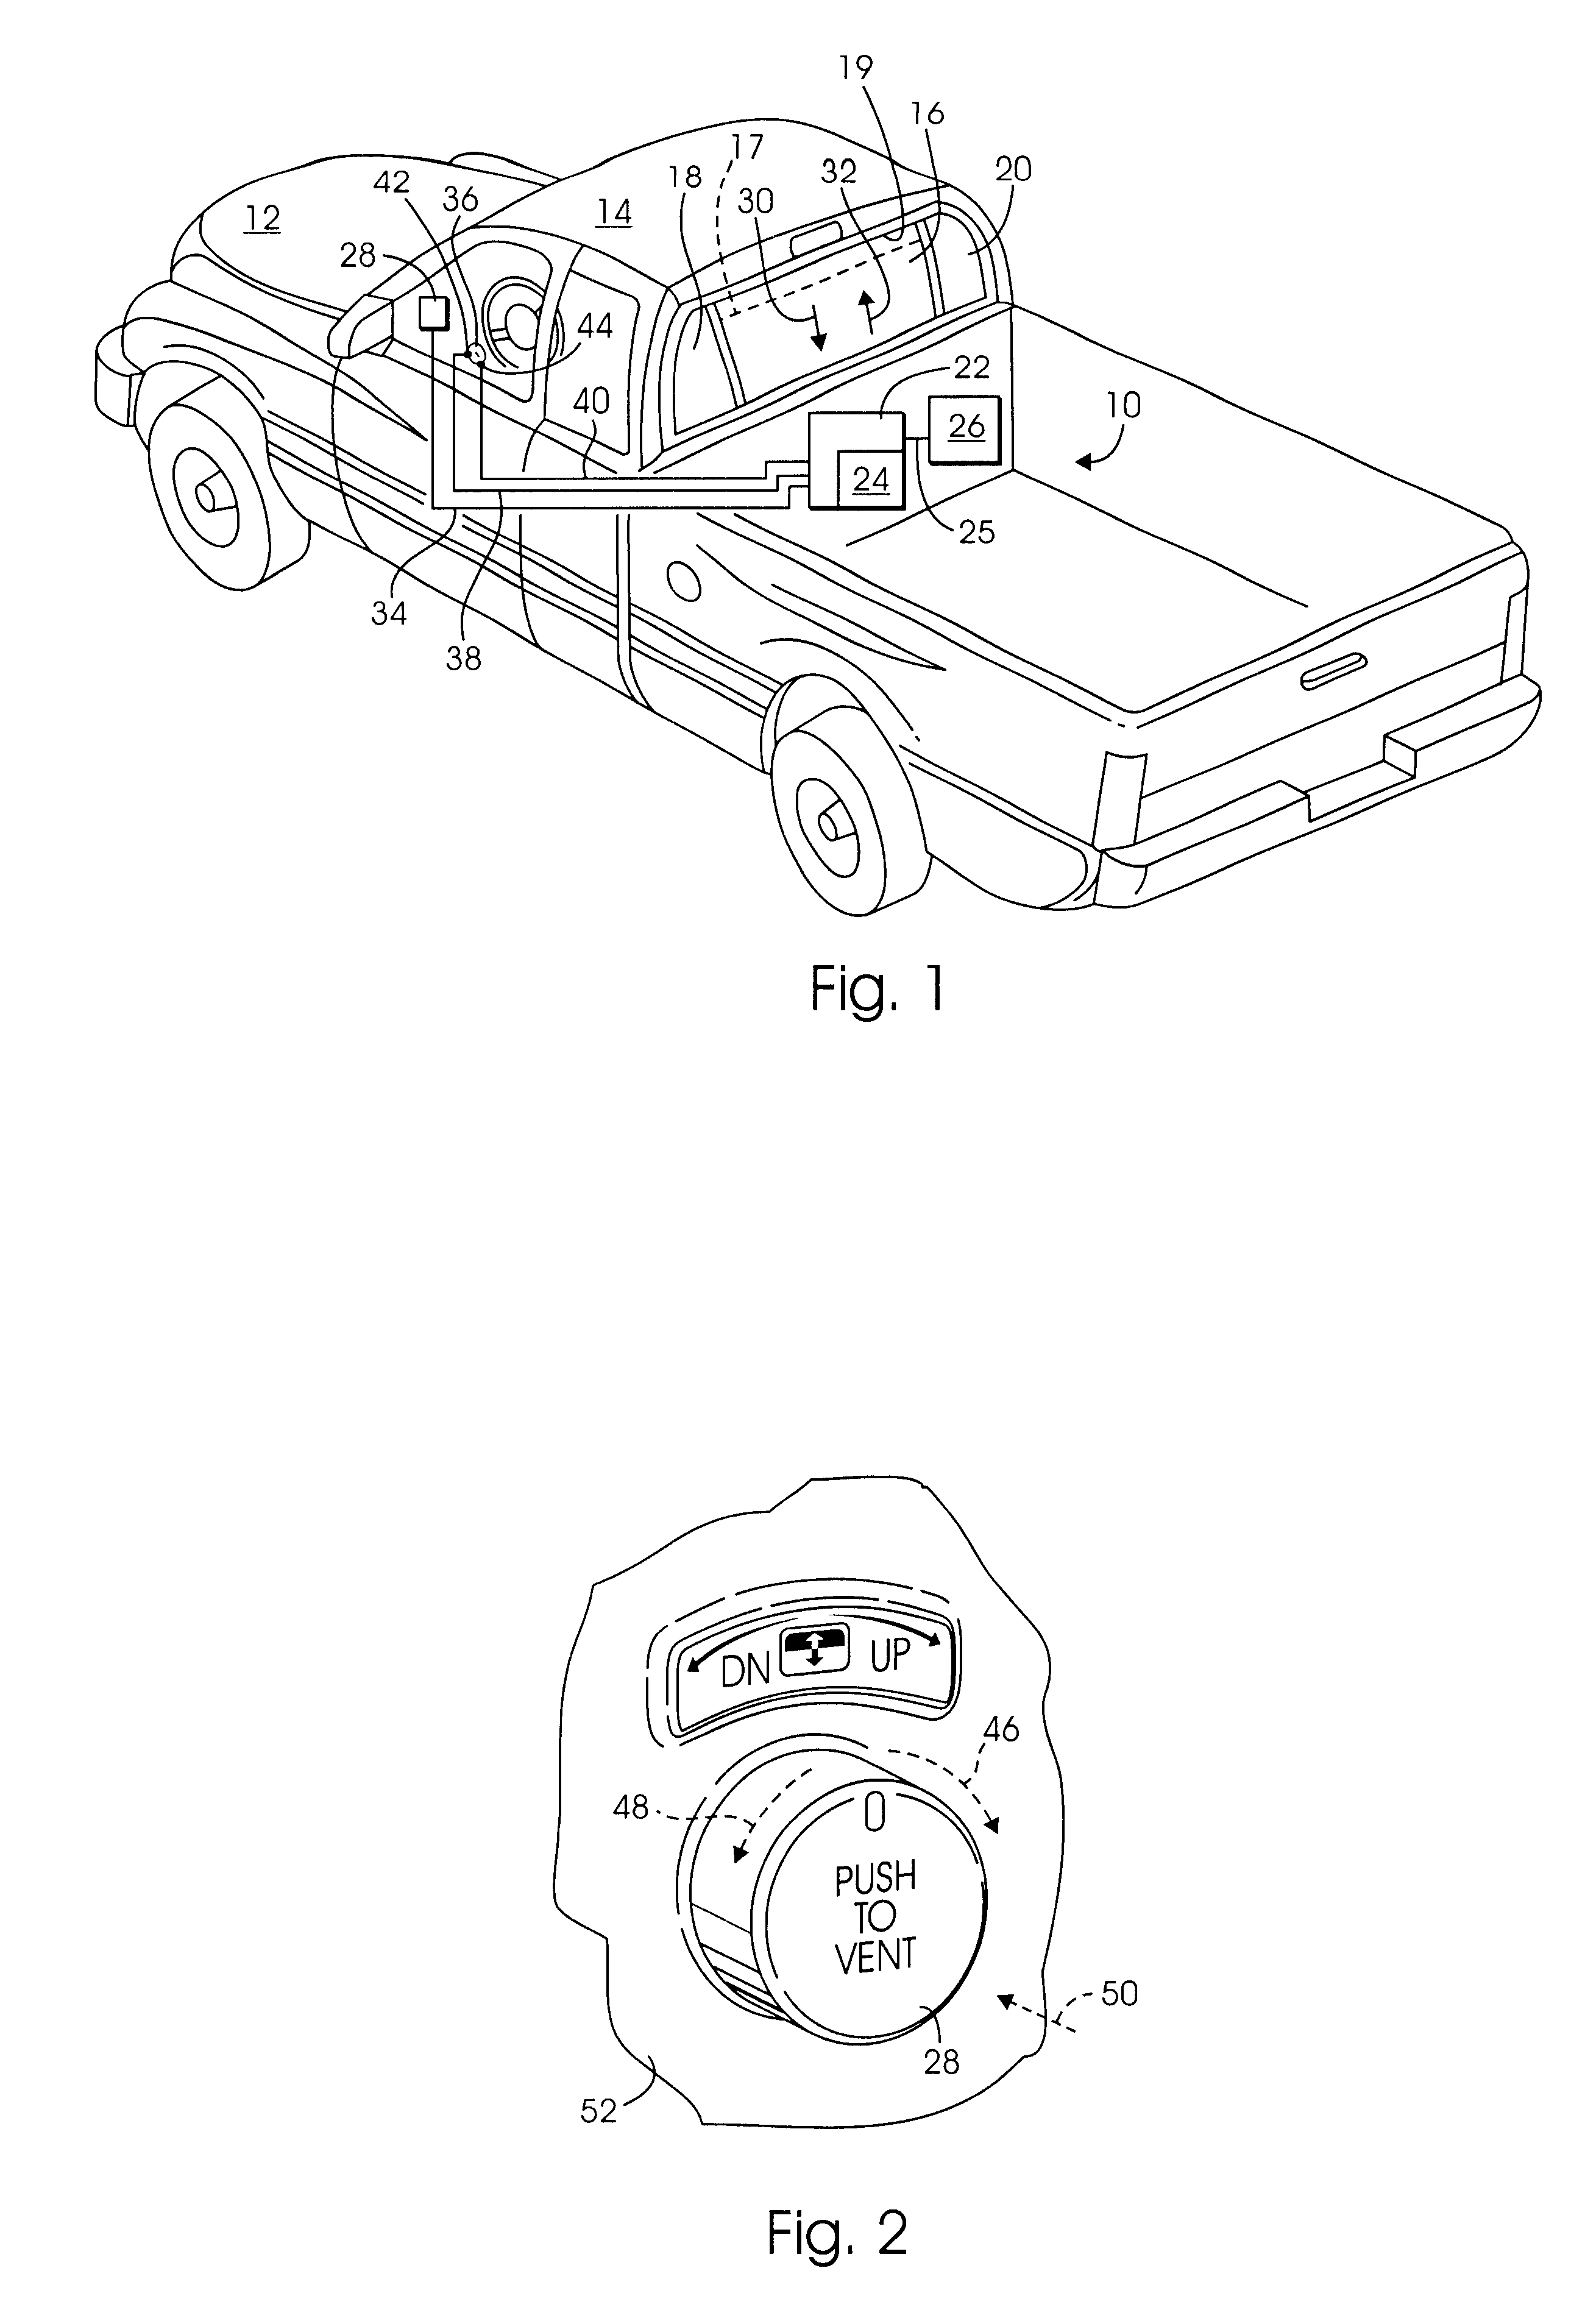 Method and apparatus for controllably moving a window